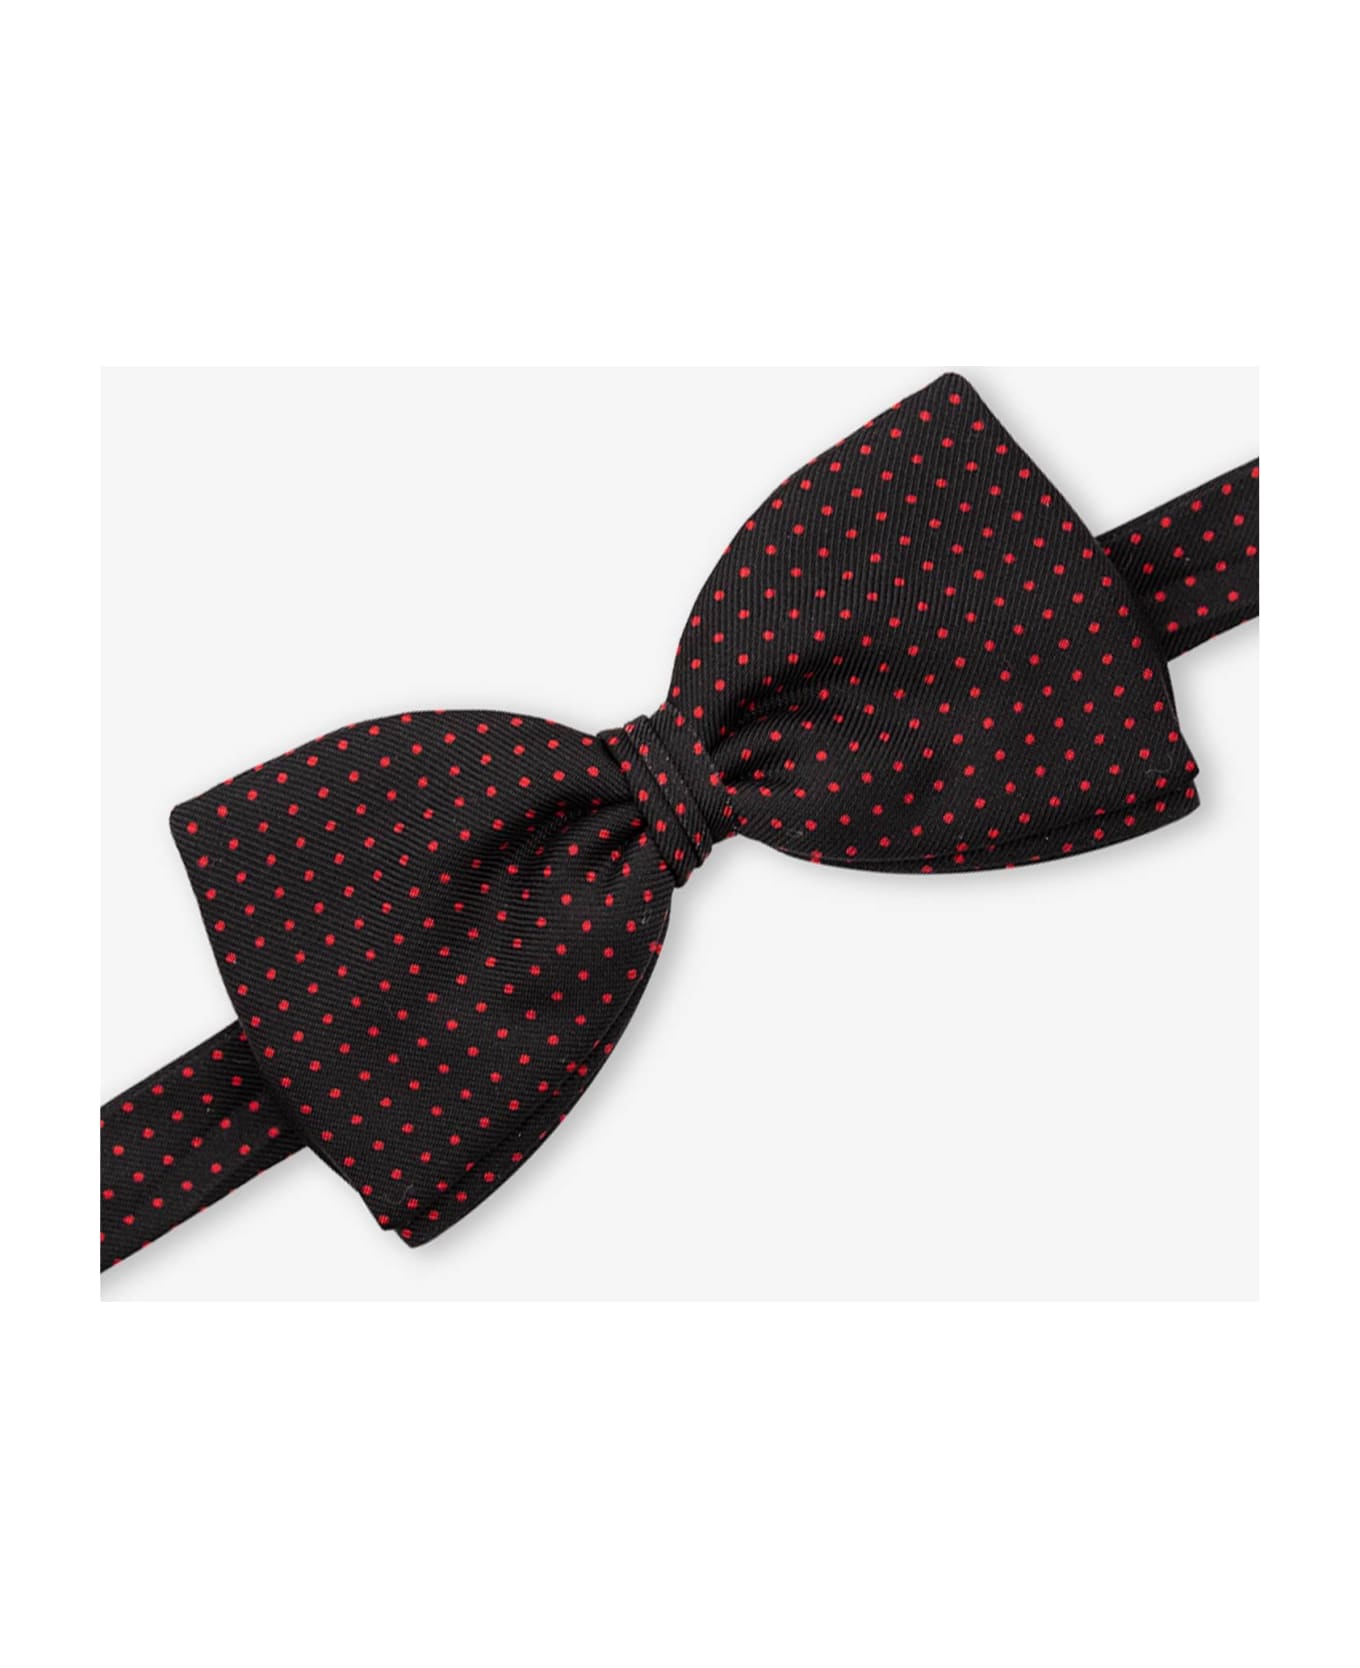 Larusmiani Bow Tie 'pois' Tie - Red ネクタイ